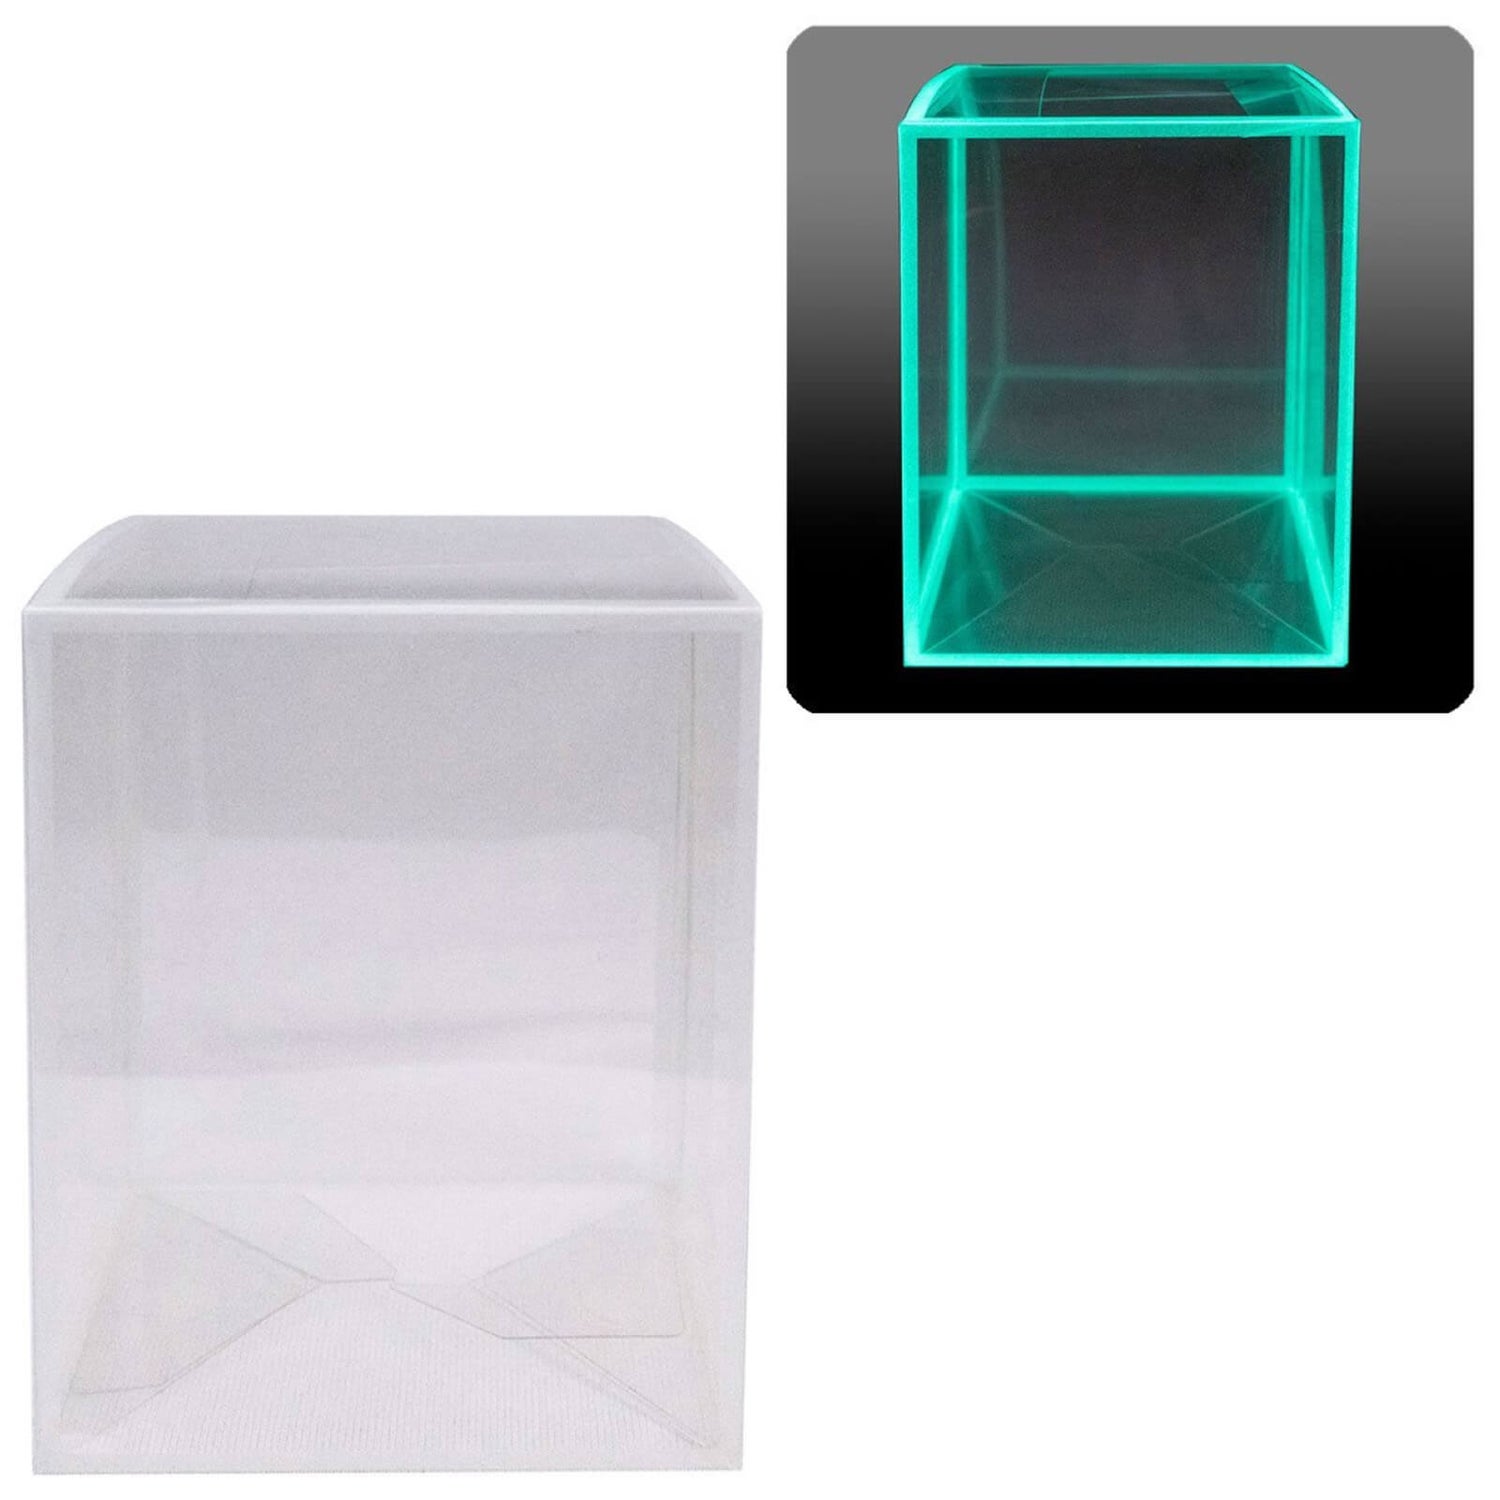 3 3/4" Vinyl Collectible Collapsible Protector Box 10-pack (Glow-In-The-Dark)